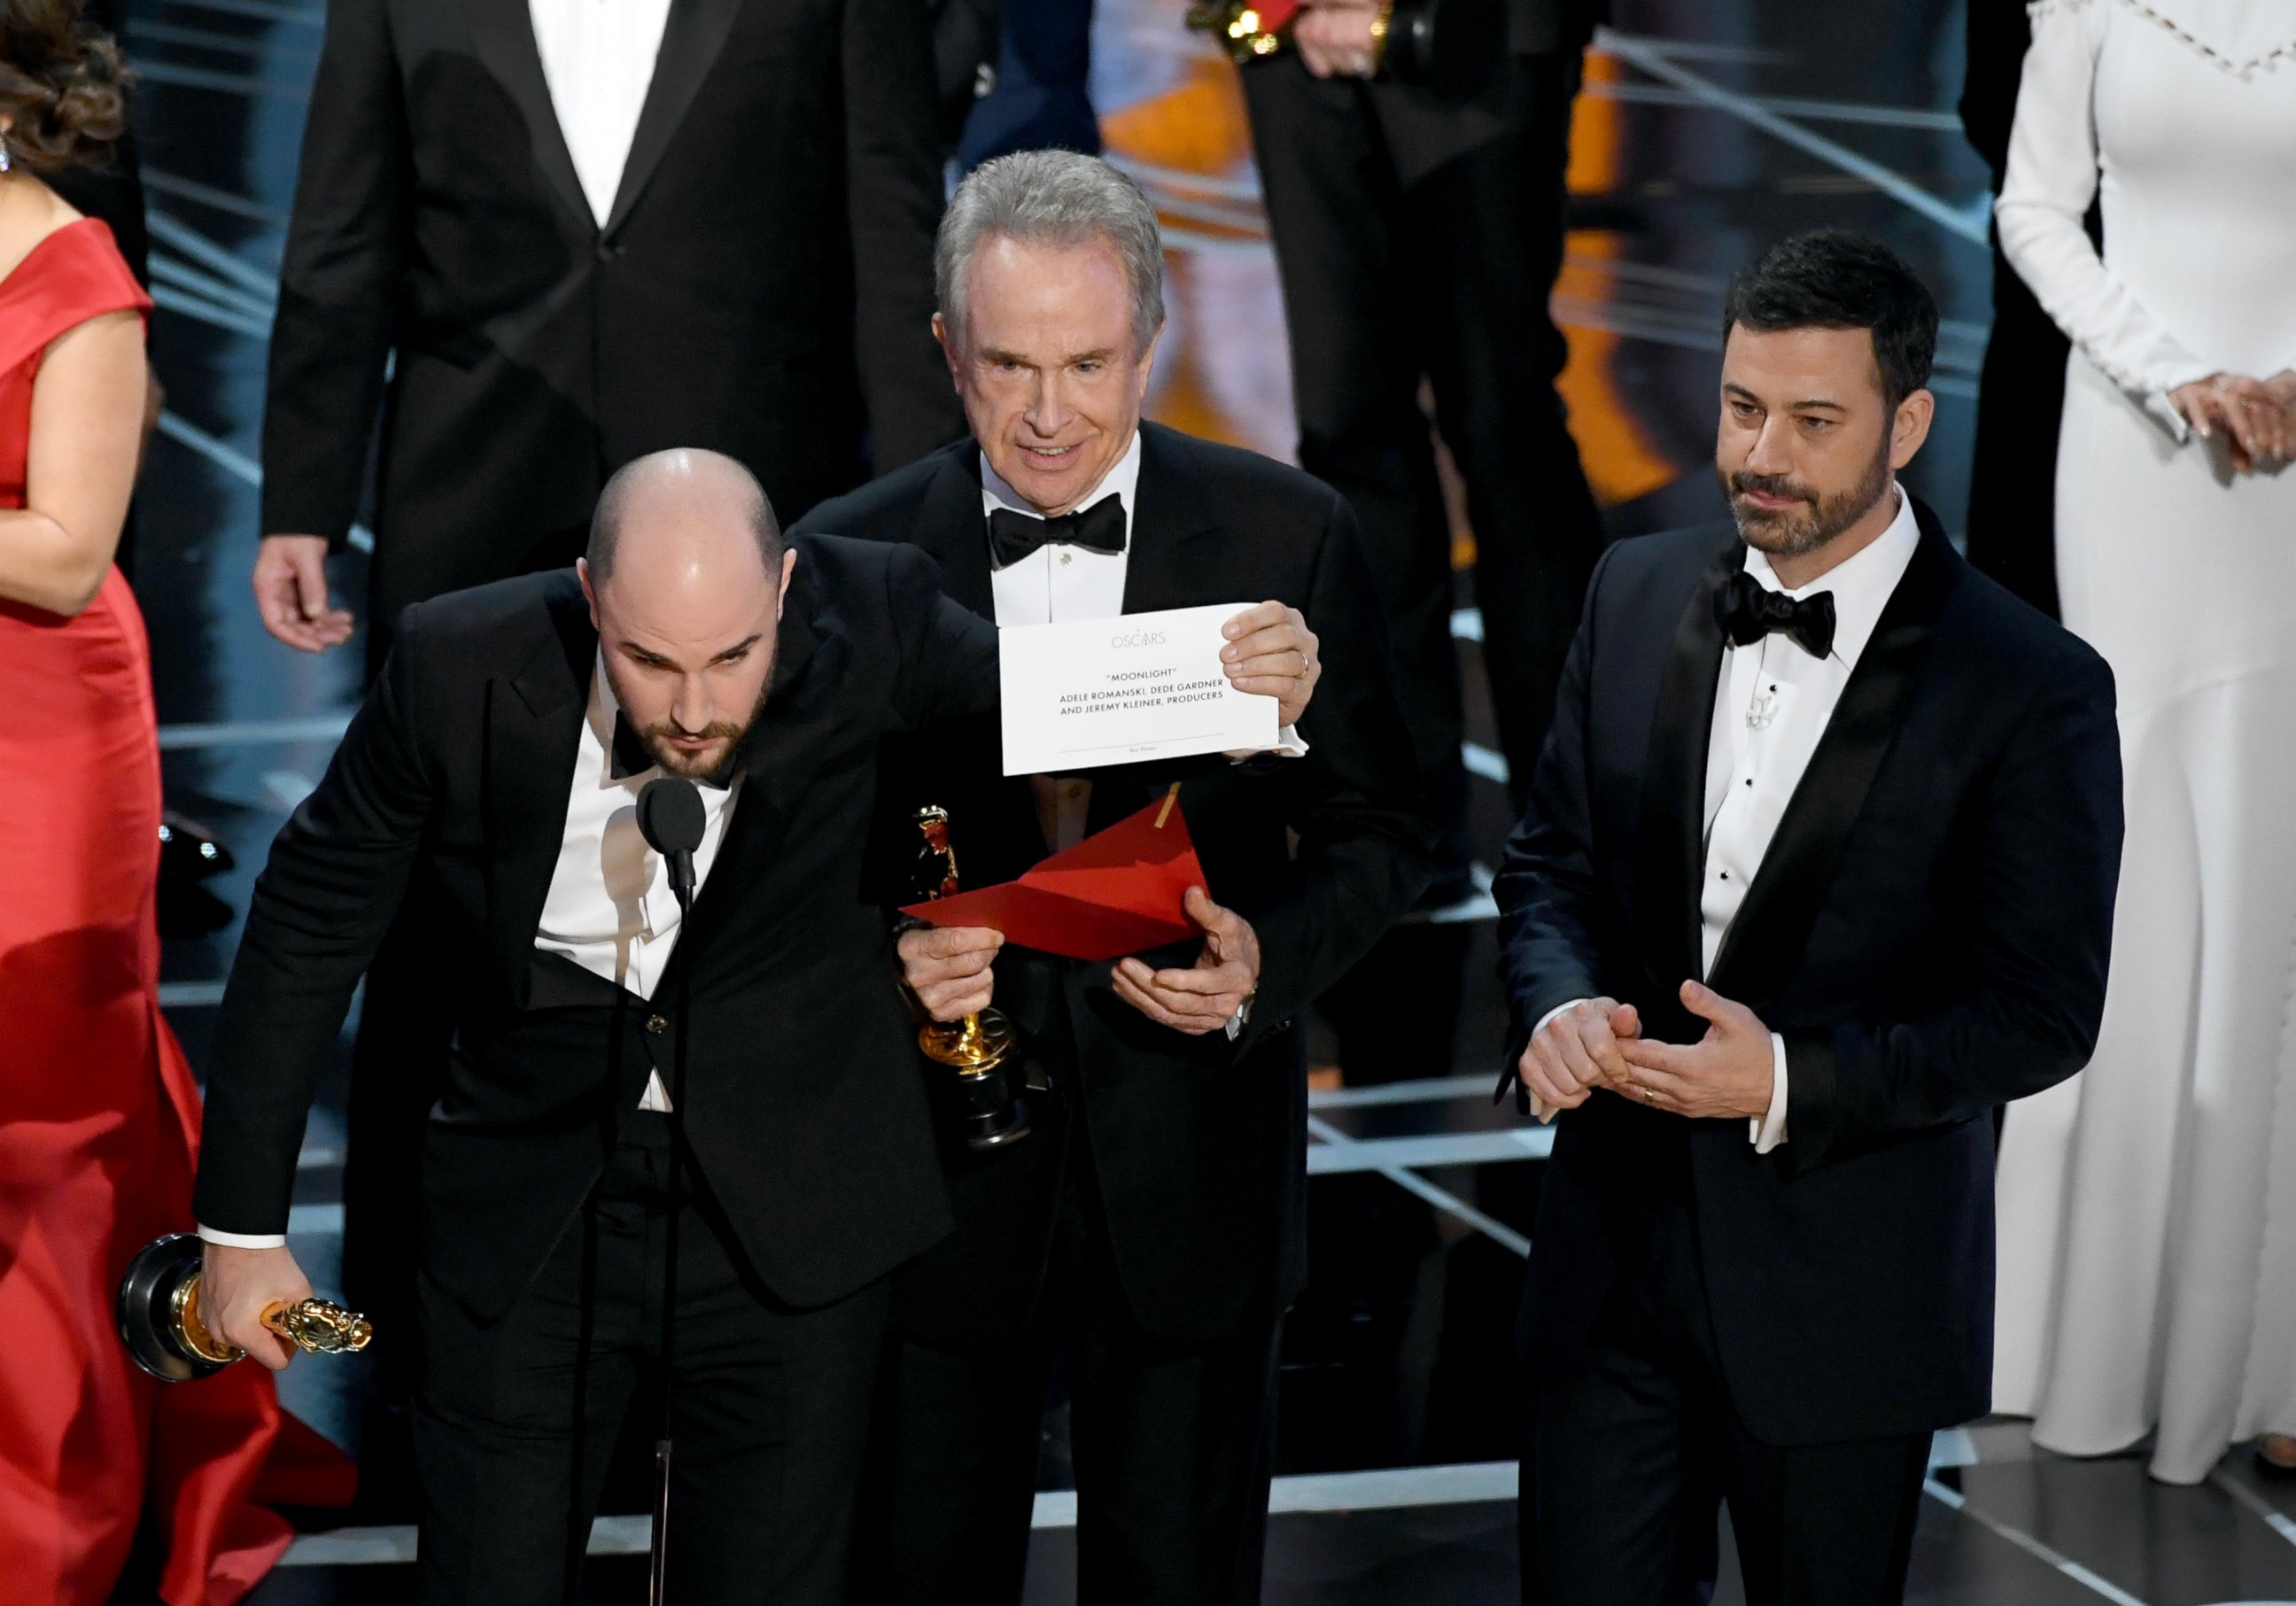 PHOTO: "La La Land" producer Jordan Horowitz holds up the winner card reading actual Best Picture winner "Moonlight" as Warren Beatty and Jimmy Kimmel look on during the 89th Annual Academy Awards on Feb. 26, 2017 in Hollywood, Calif.